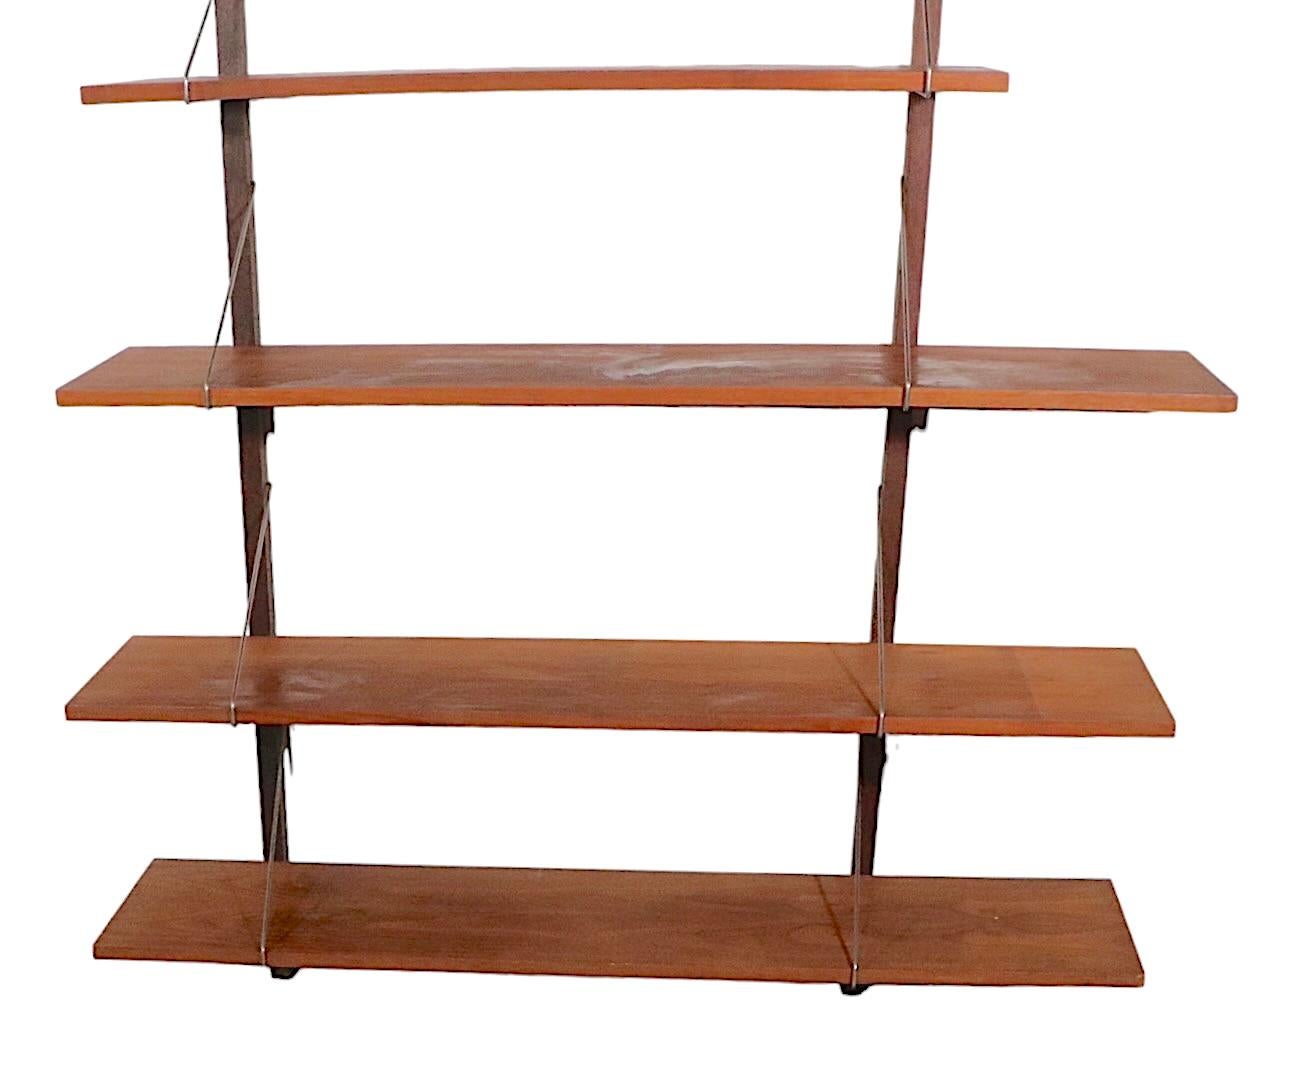 Danish Mid Century Wall Unit with 8 Shelves, circa 1950 - 1960s For Sale 5